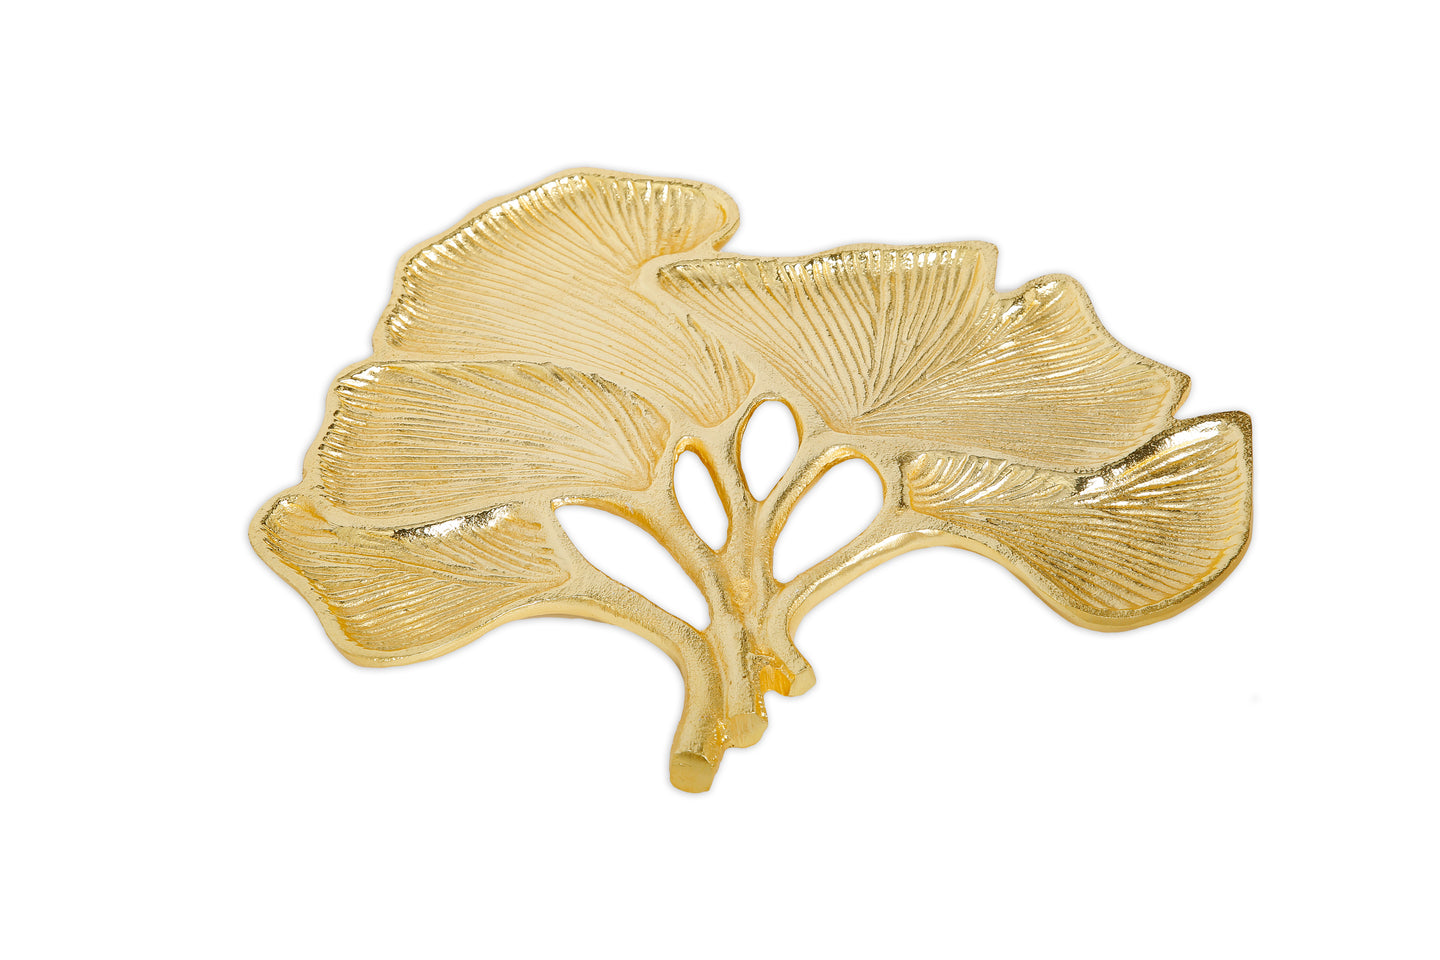 Gold Leaf Sectional Dish - 11.75